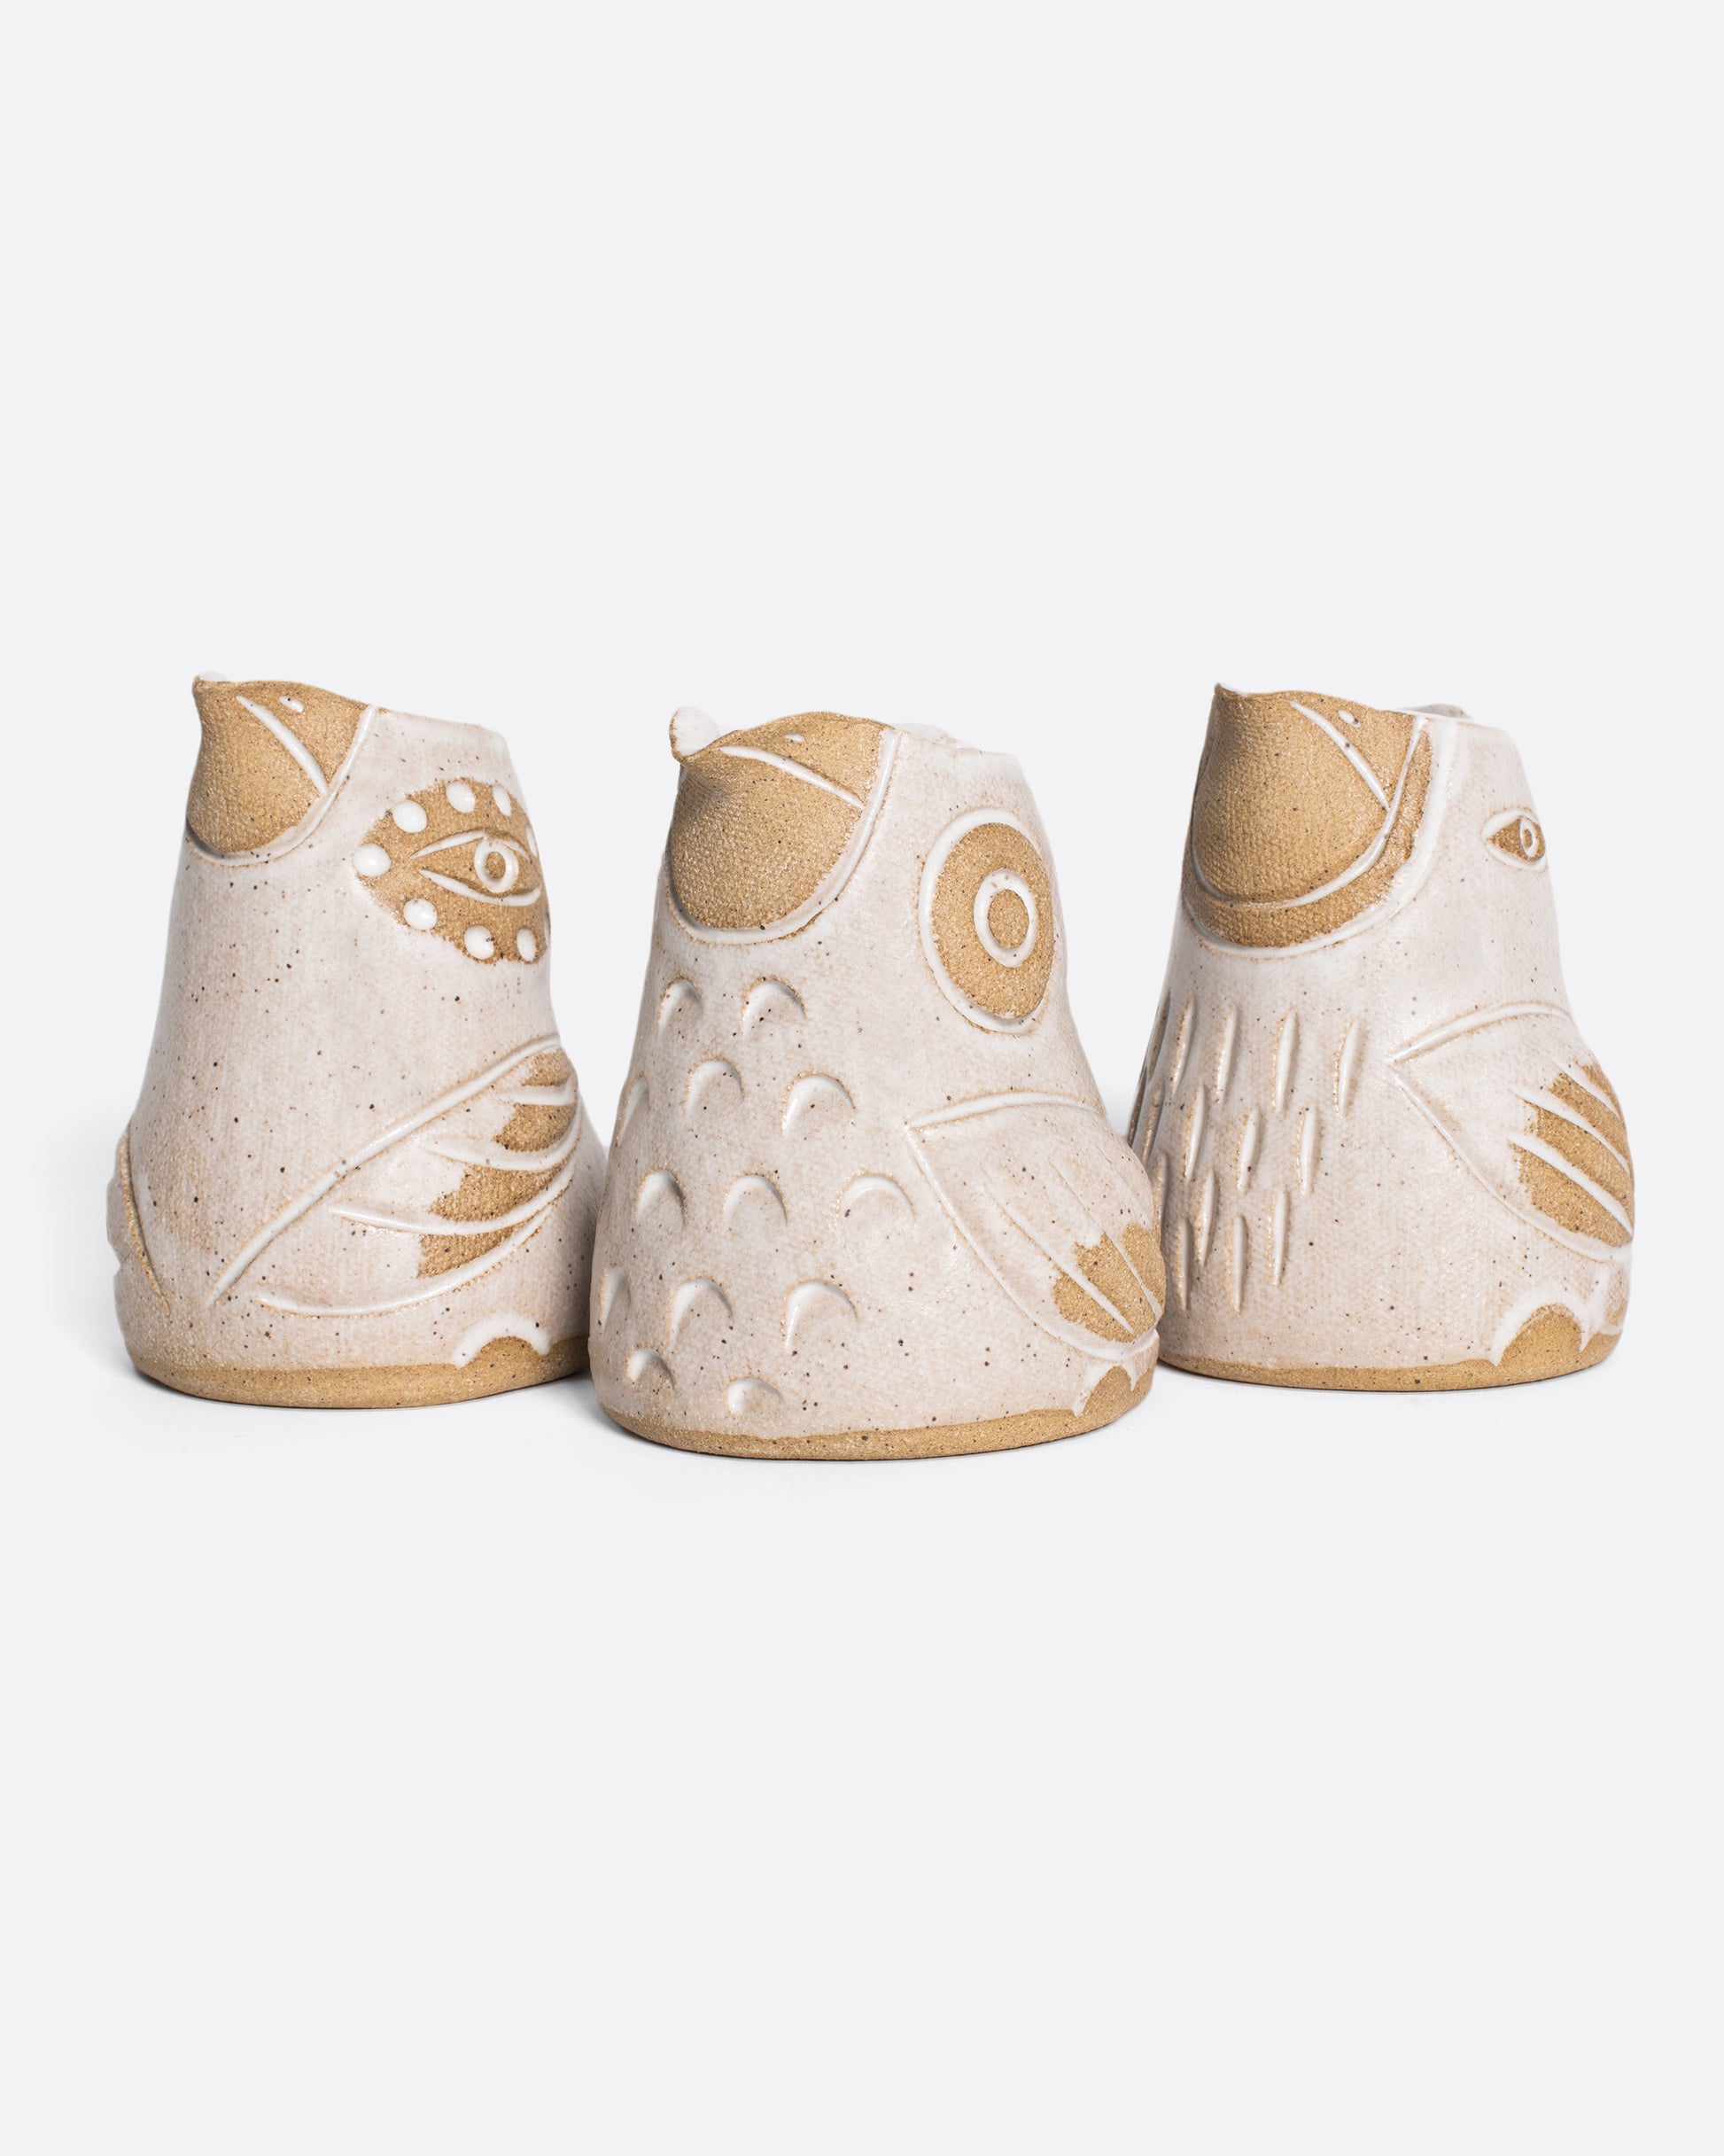 Group of three creamers shaped like birds in white and brown.